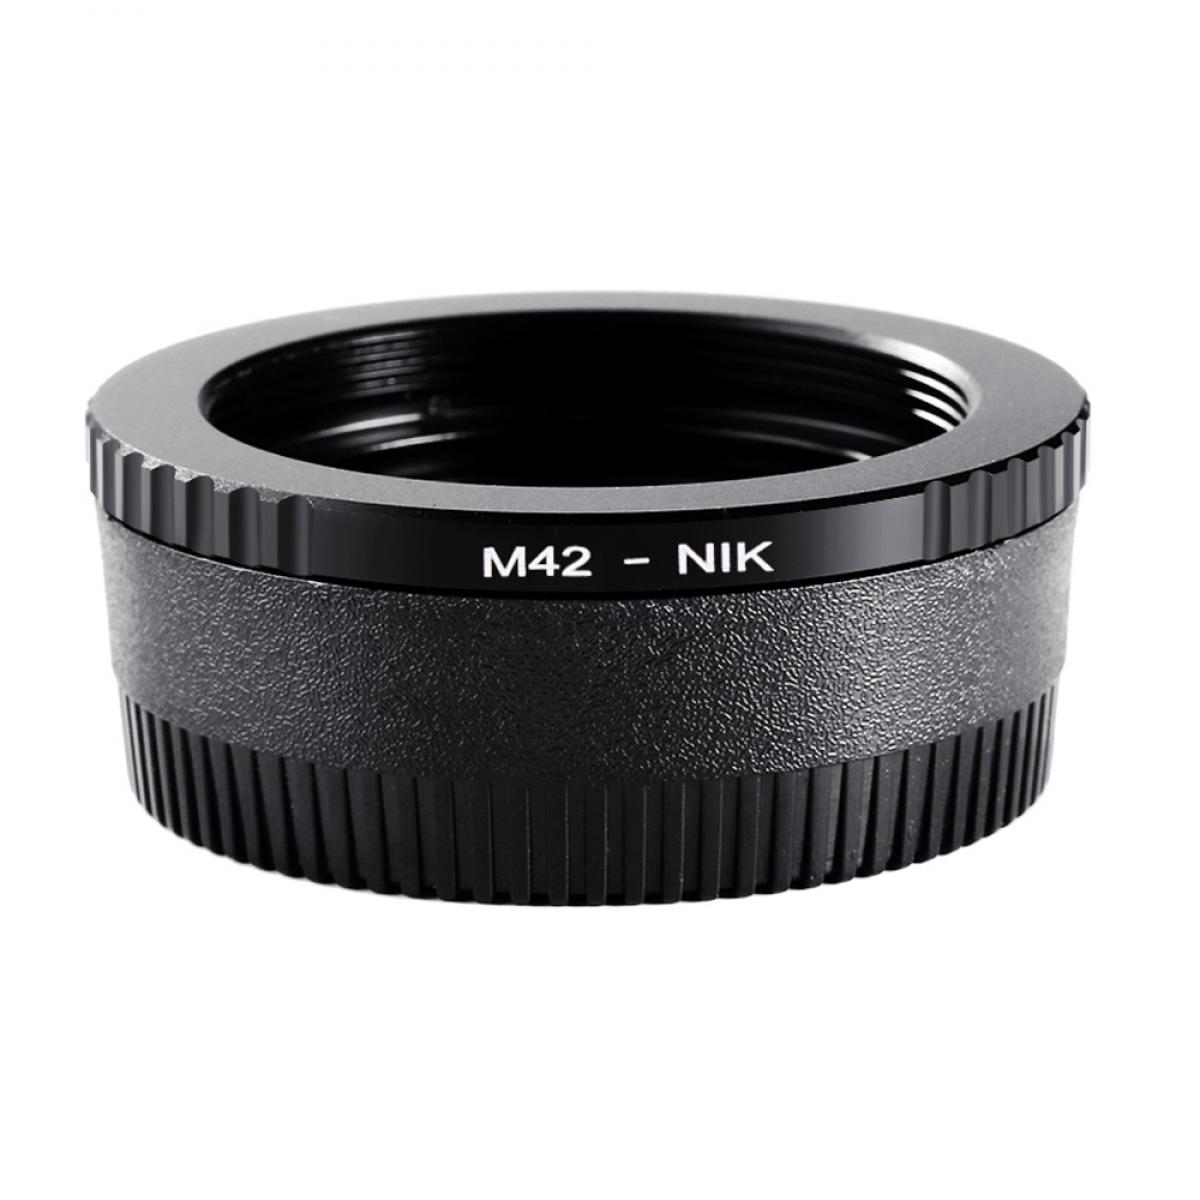 K&F M10171 M42 Lenses to Nikon F Lens Mount Adapter with Optic Glass